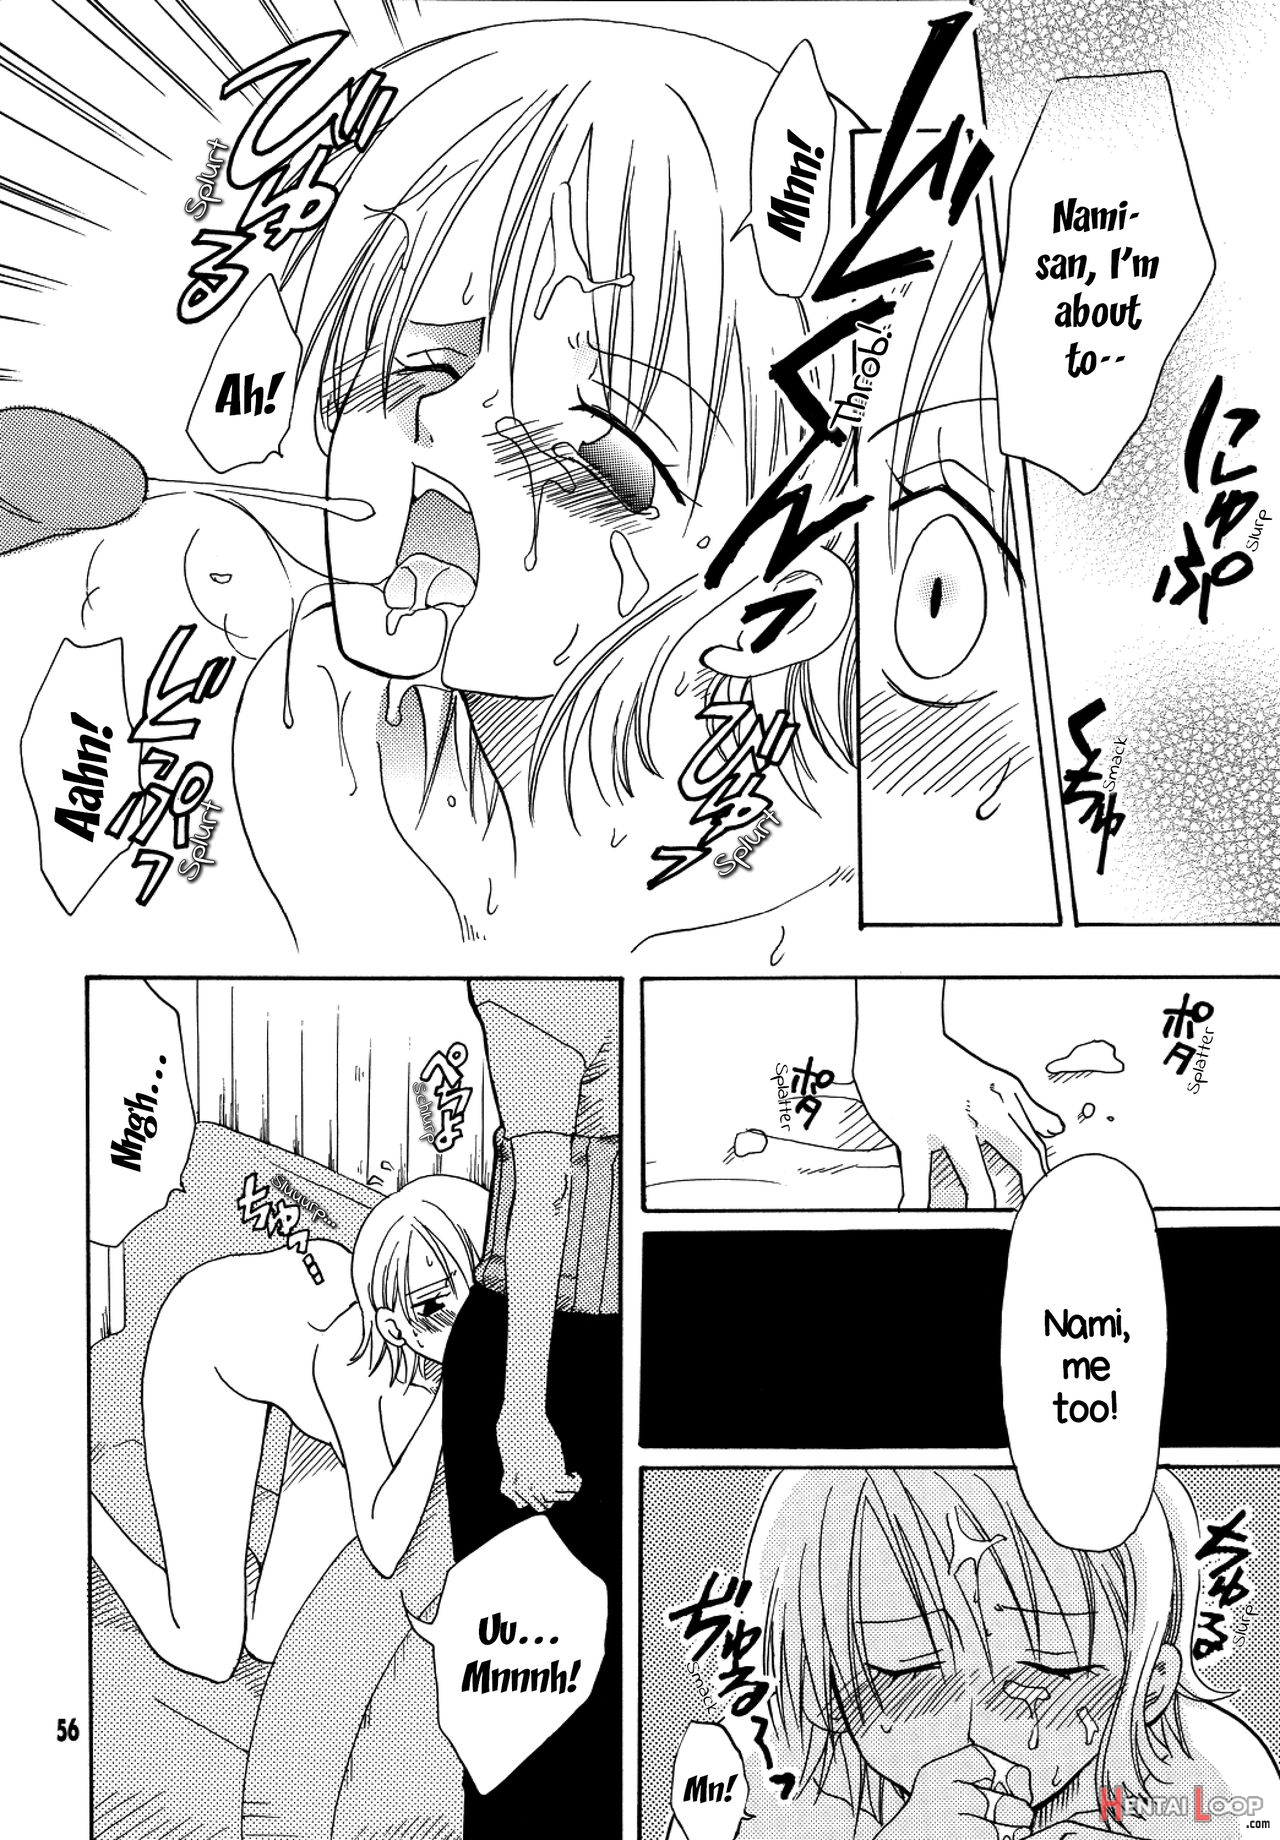 Shiawase Punch! 1, 2 And 3 page 52